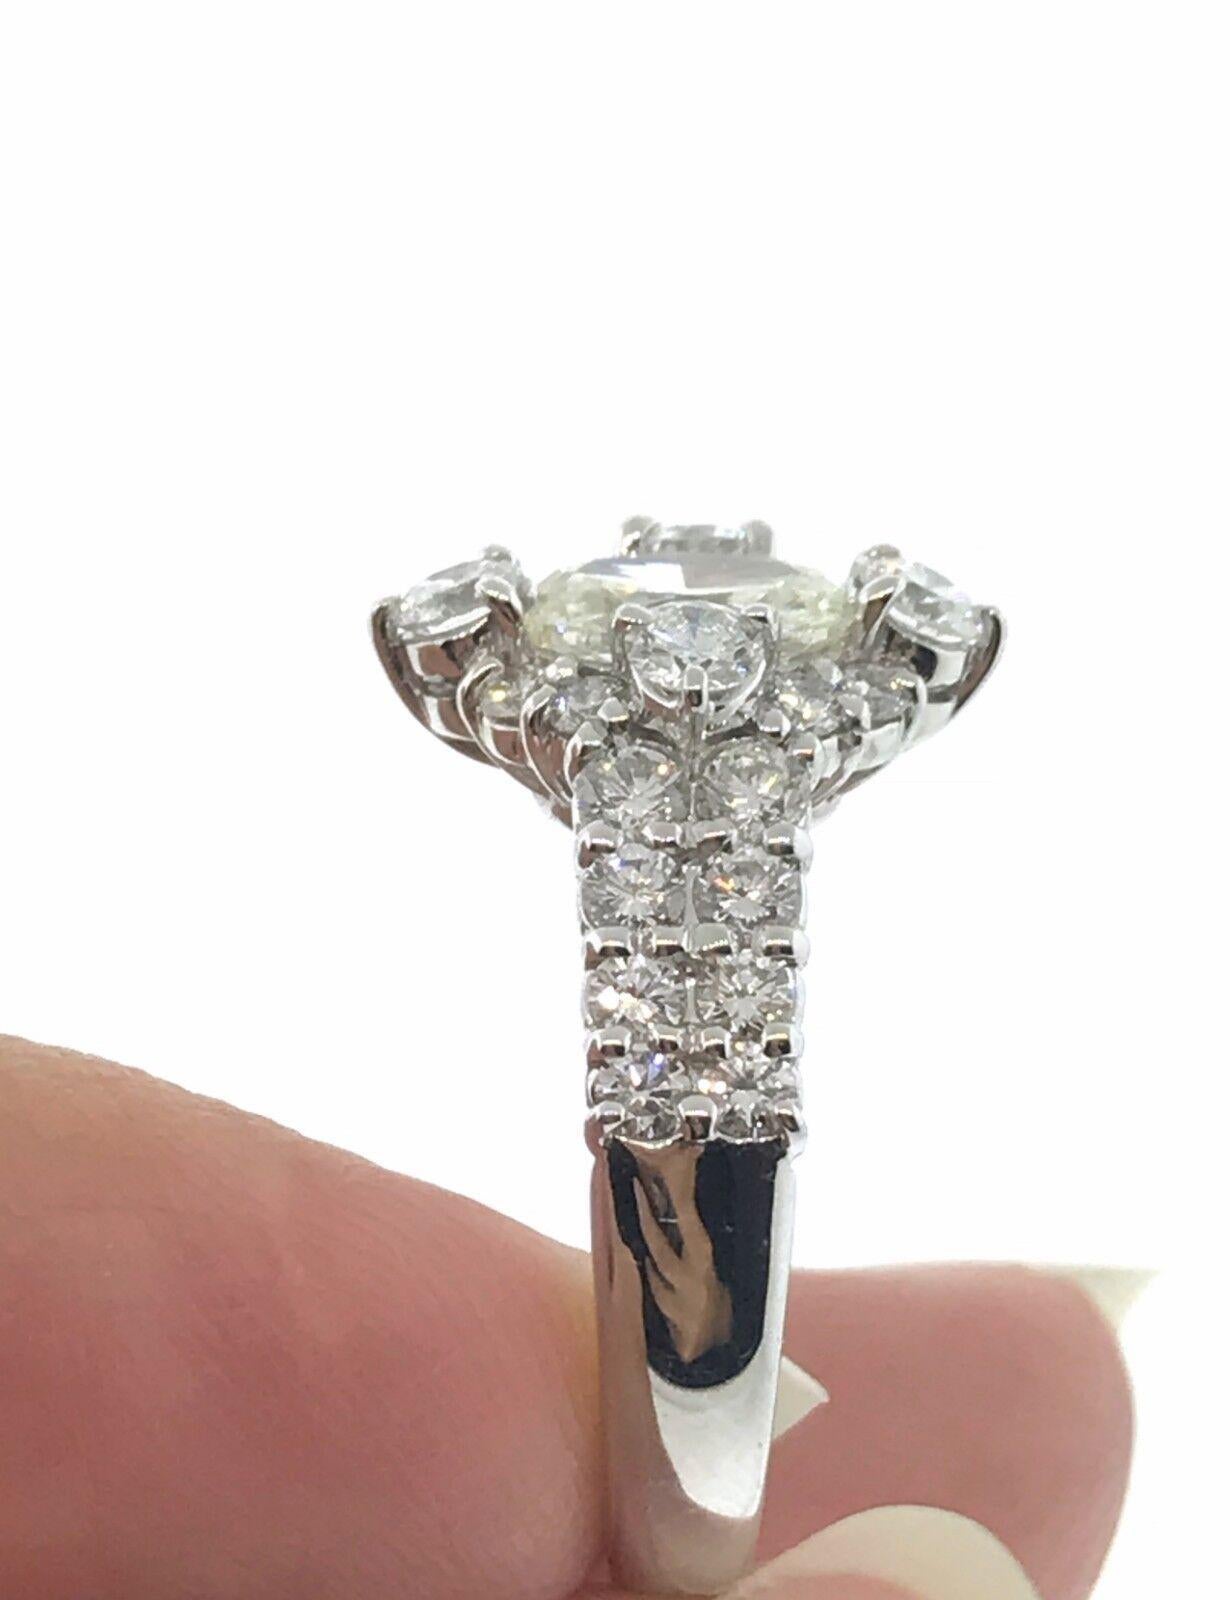 1.00 carat Oval Shaped Diamond in Round Diamond Halo Platinum Ring In Excellent Condition For Sale In La Jolla, CA